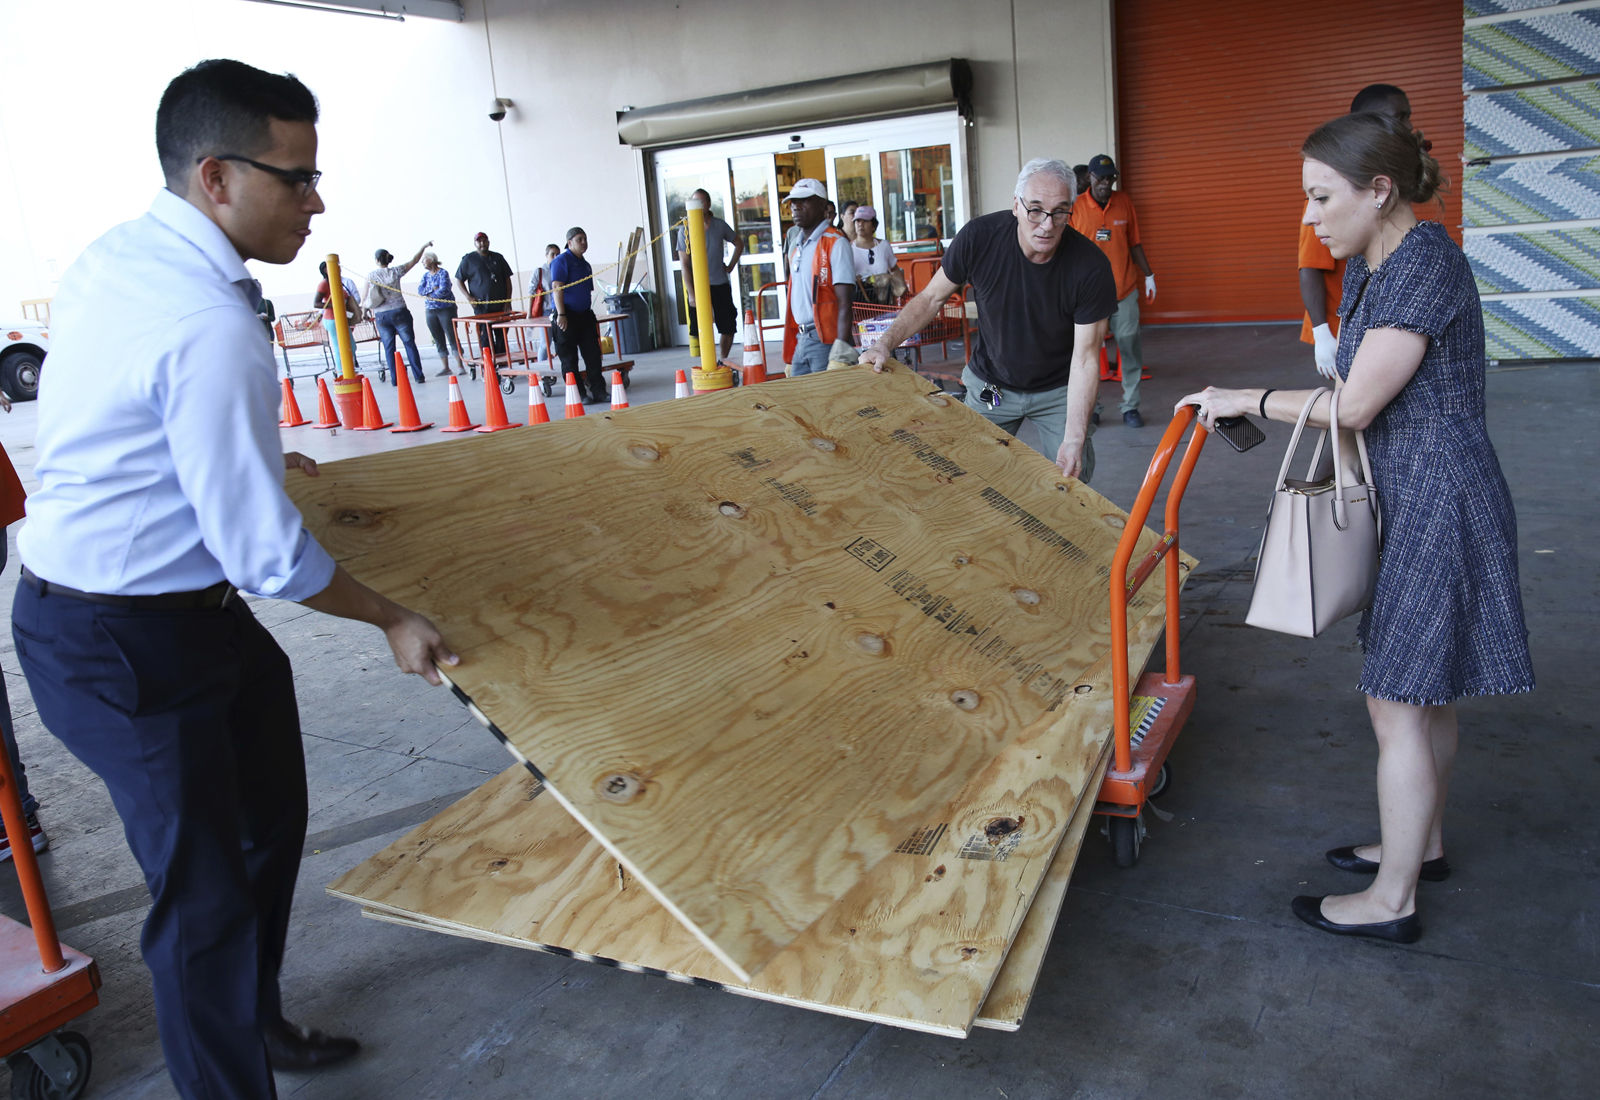 Carla Perroni Aguilera of Miami Beach, Fla., holds a cart as her husband Ronald Aguilera and her father Joe Perroni load sheets of plywood at The Home Depot store in North Miami, Fla., Wednesday, Sept. 6, 2017. Florida residents are preparing for the possible landfall of Hurricane Irma, the most powerful Atlantic Ocean hurricane in recorded history. (AP Photo/Marta Lavandier)